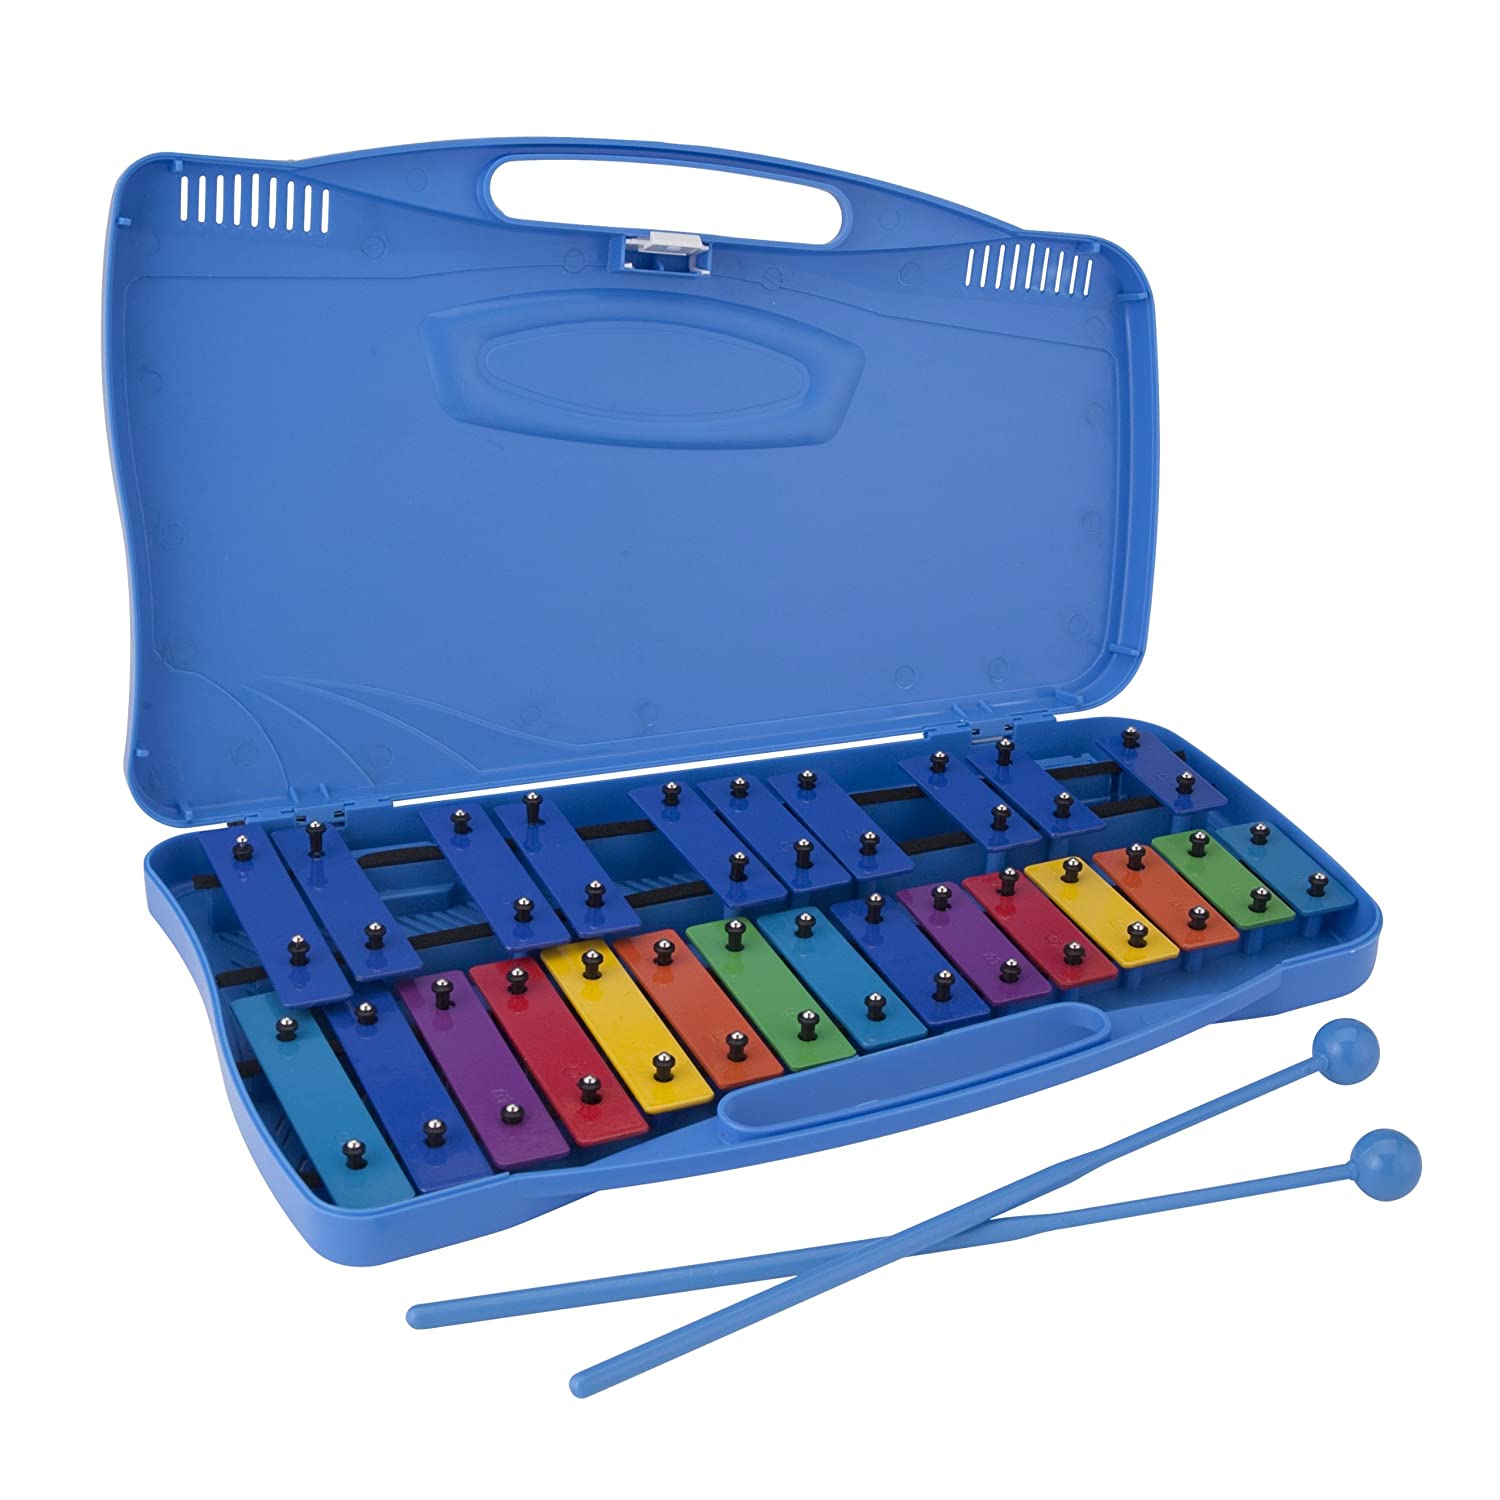 7 Best Babies Xylophone 2023 - Buying Guide & Reviews 6